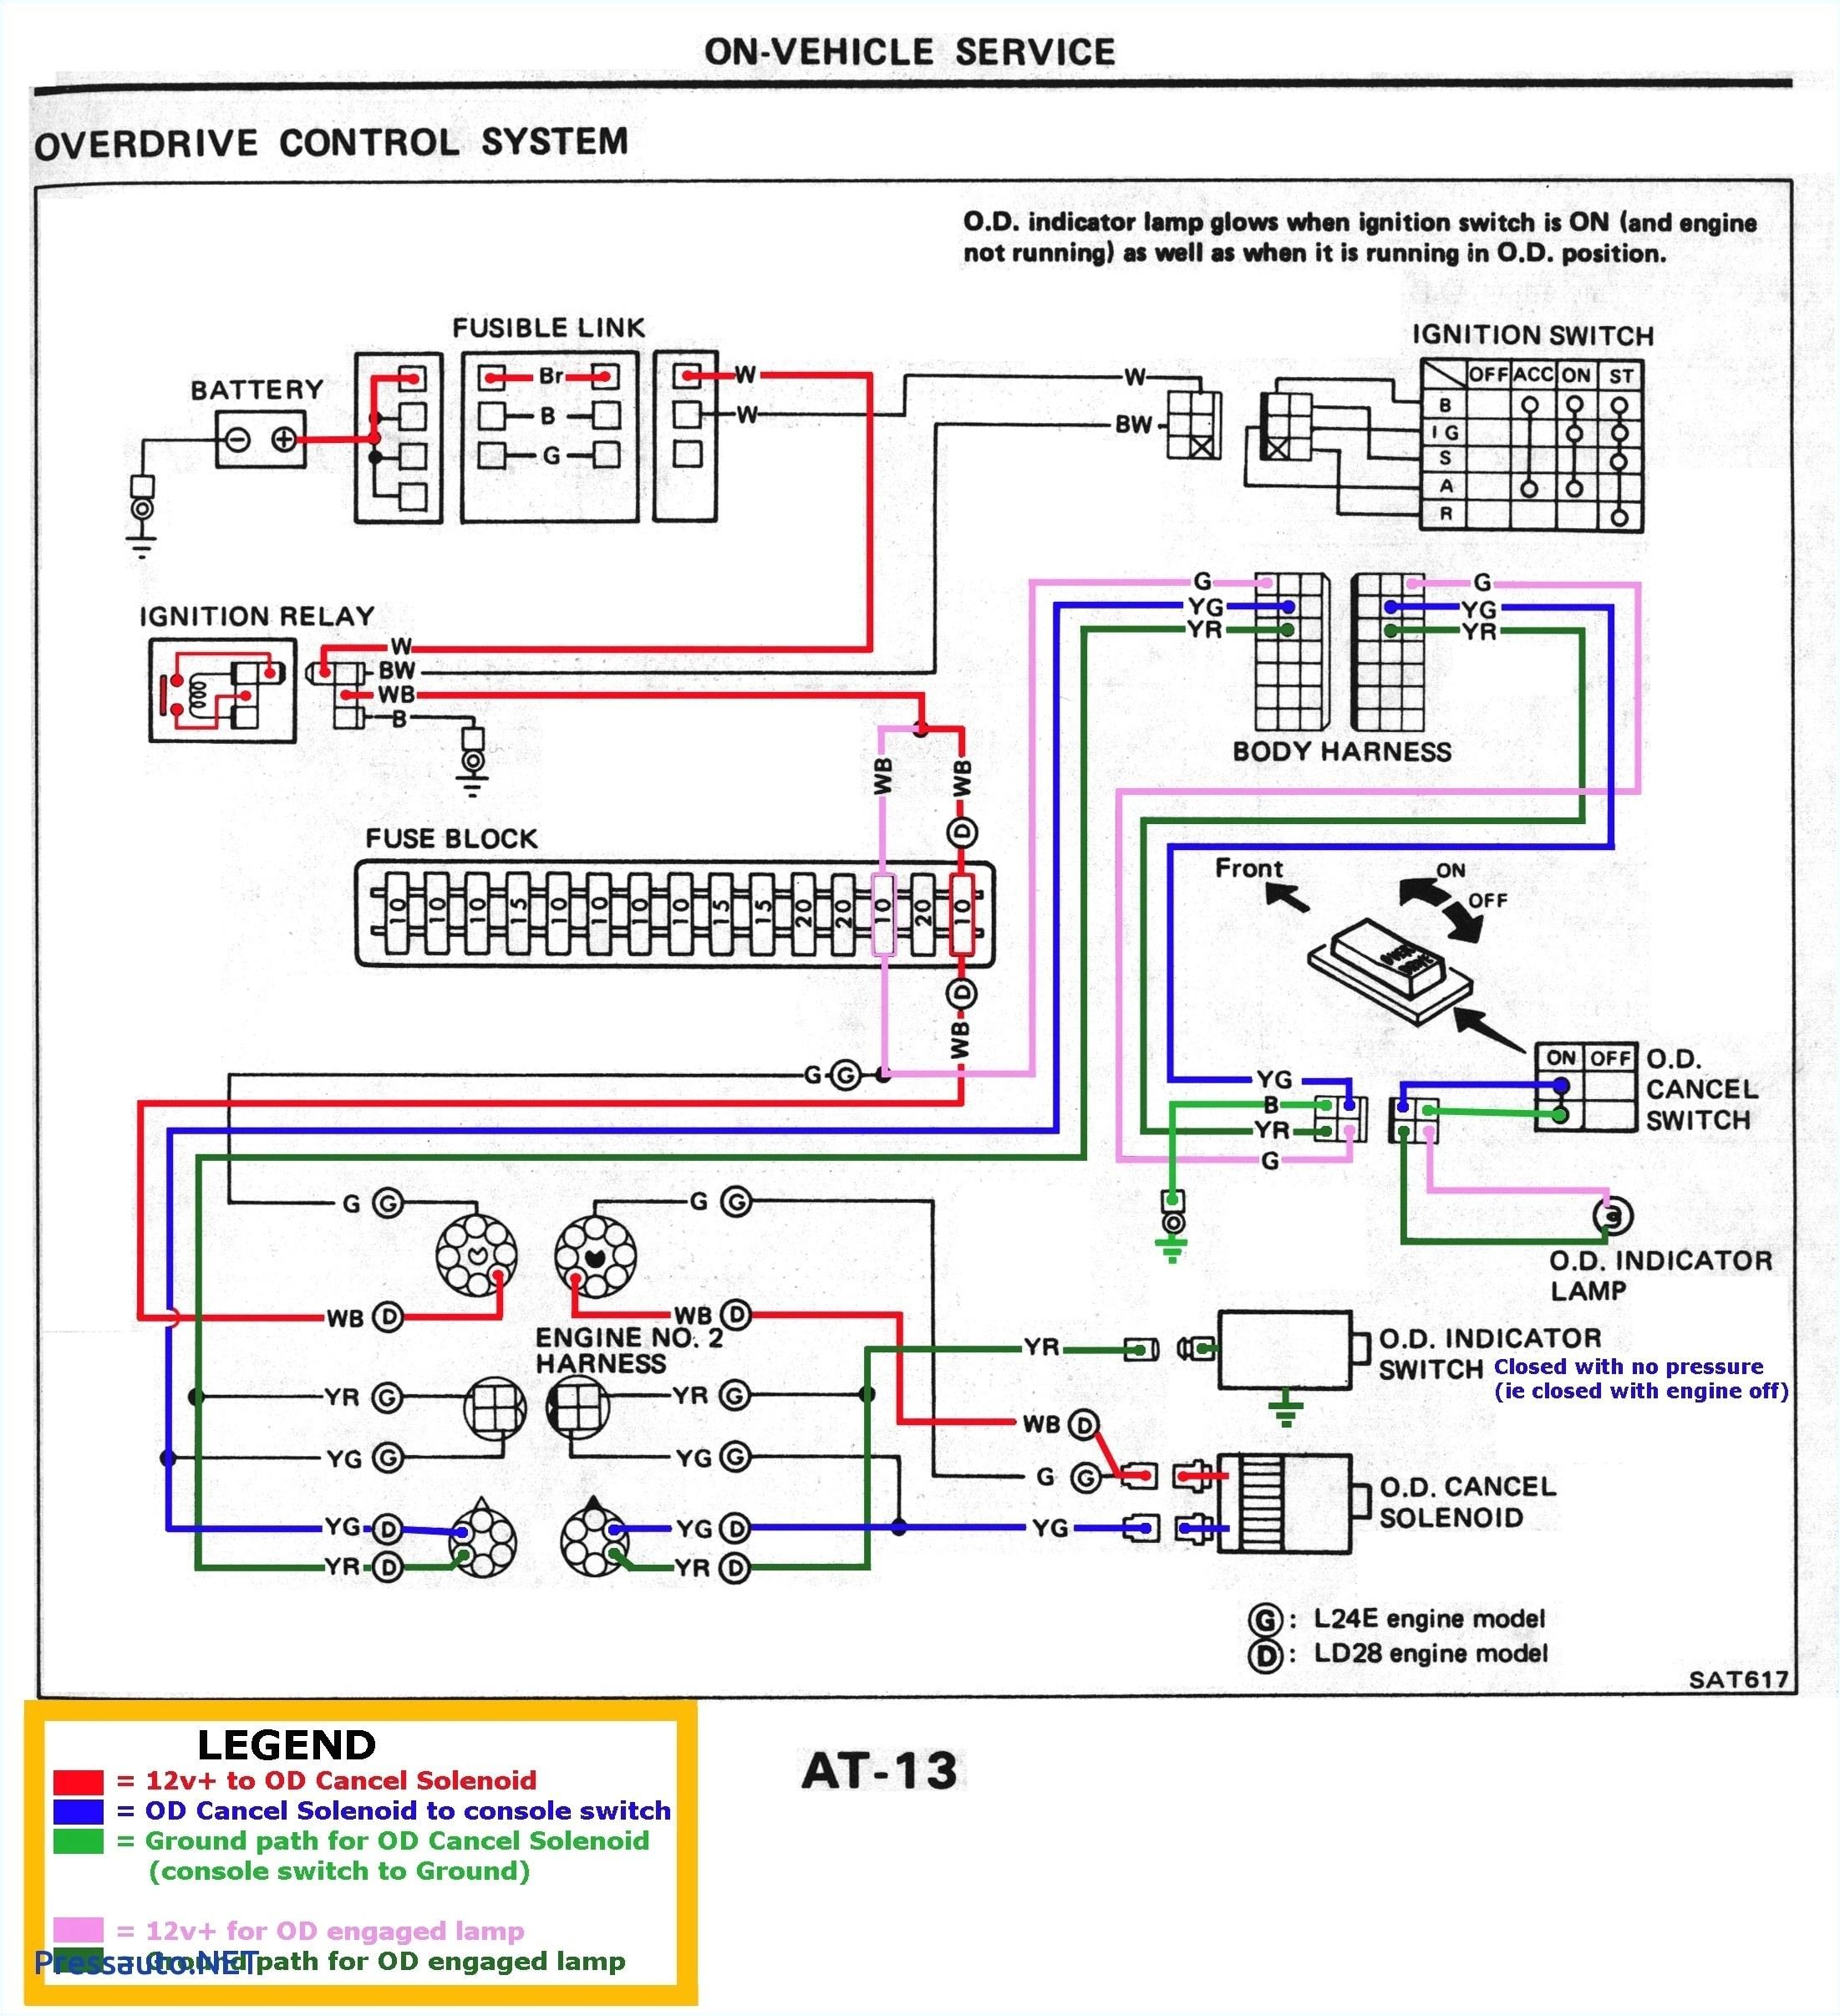 dometic led light kit wiring schematic wiring diagram schemanew car wiring diagram led 18